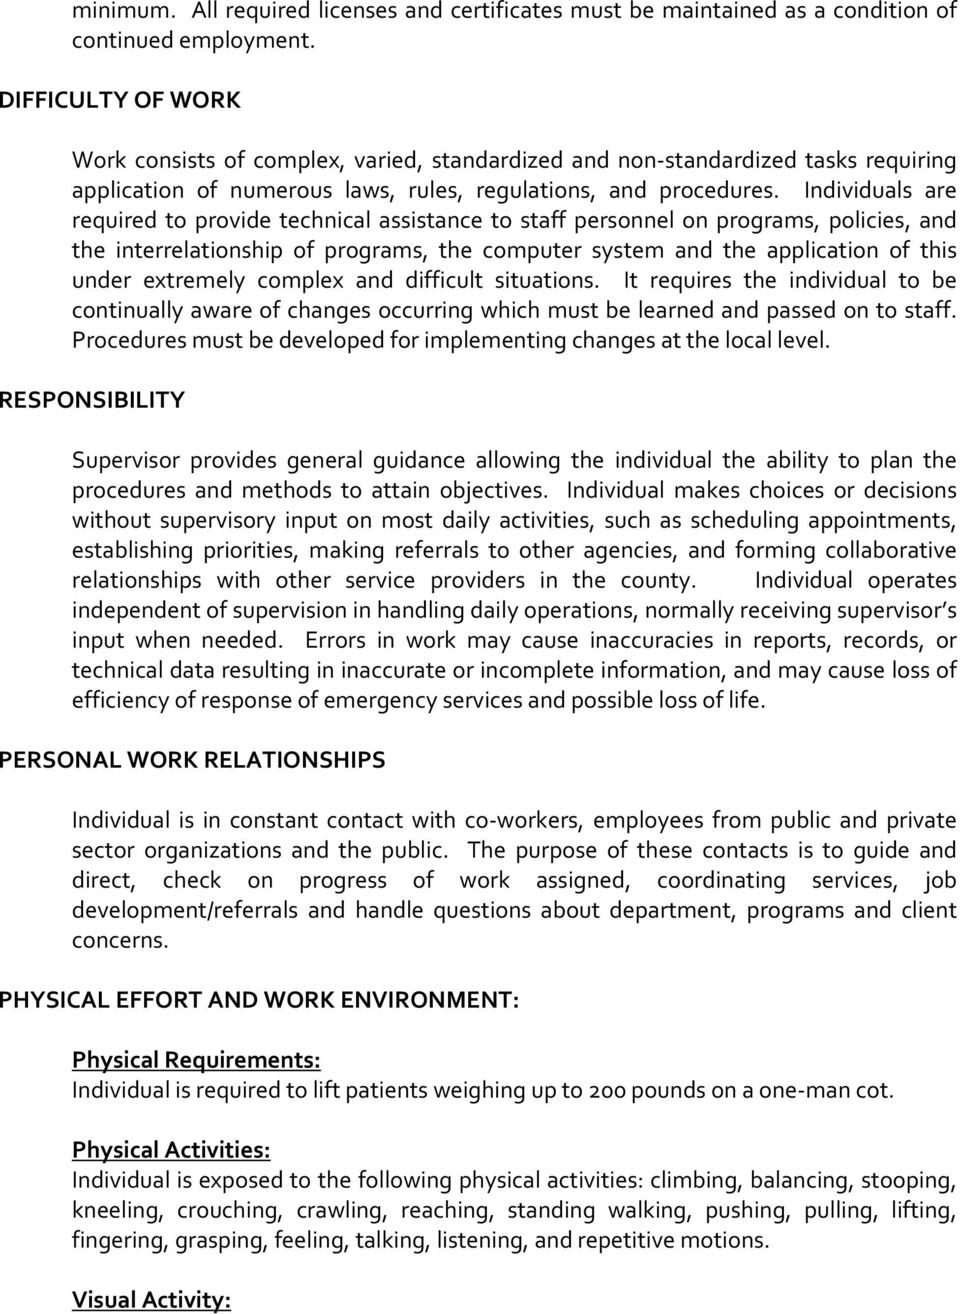 Individuals are required to provide technical assistance to staff personnel on programs, policies, and the interrelationship of programs, the computer system and the application of this under